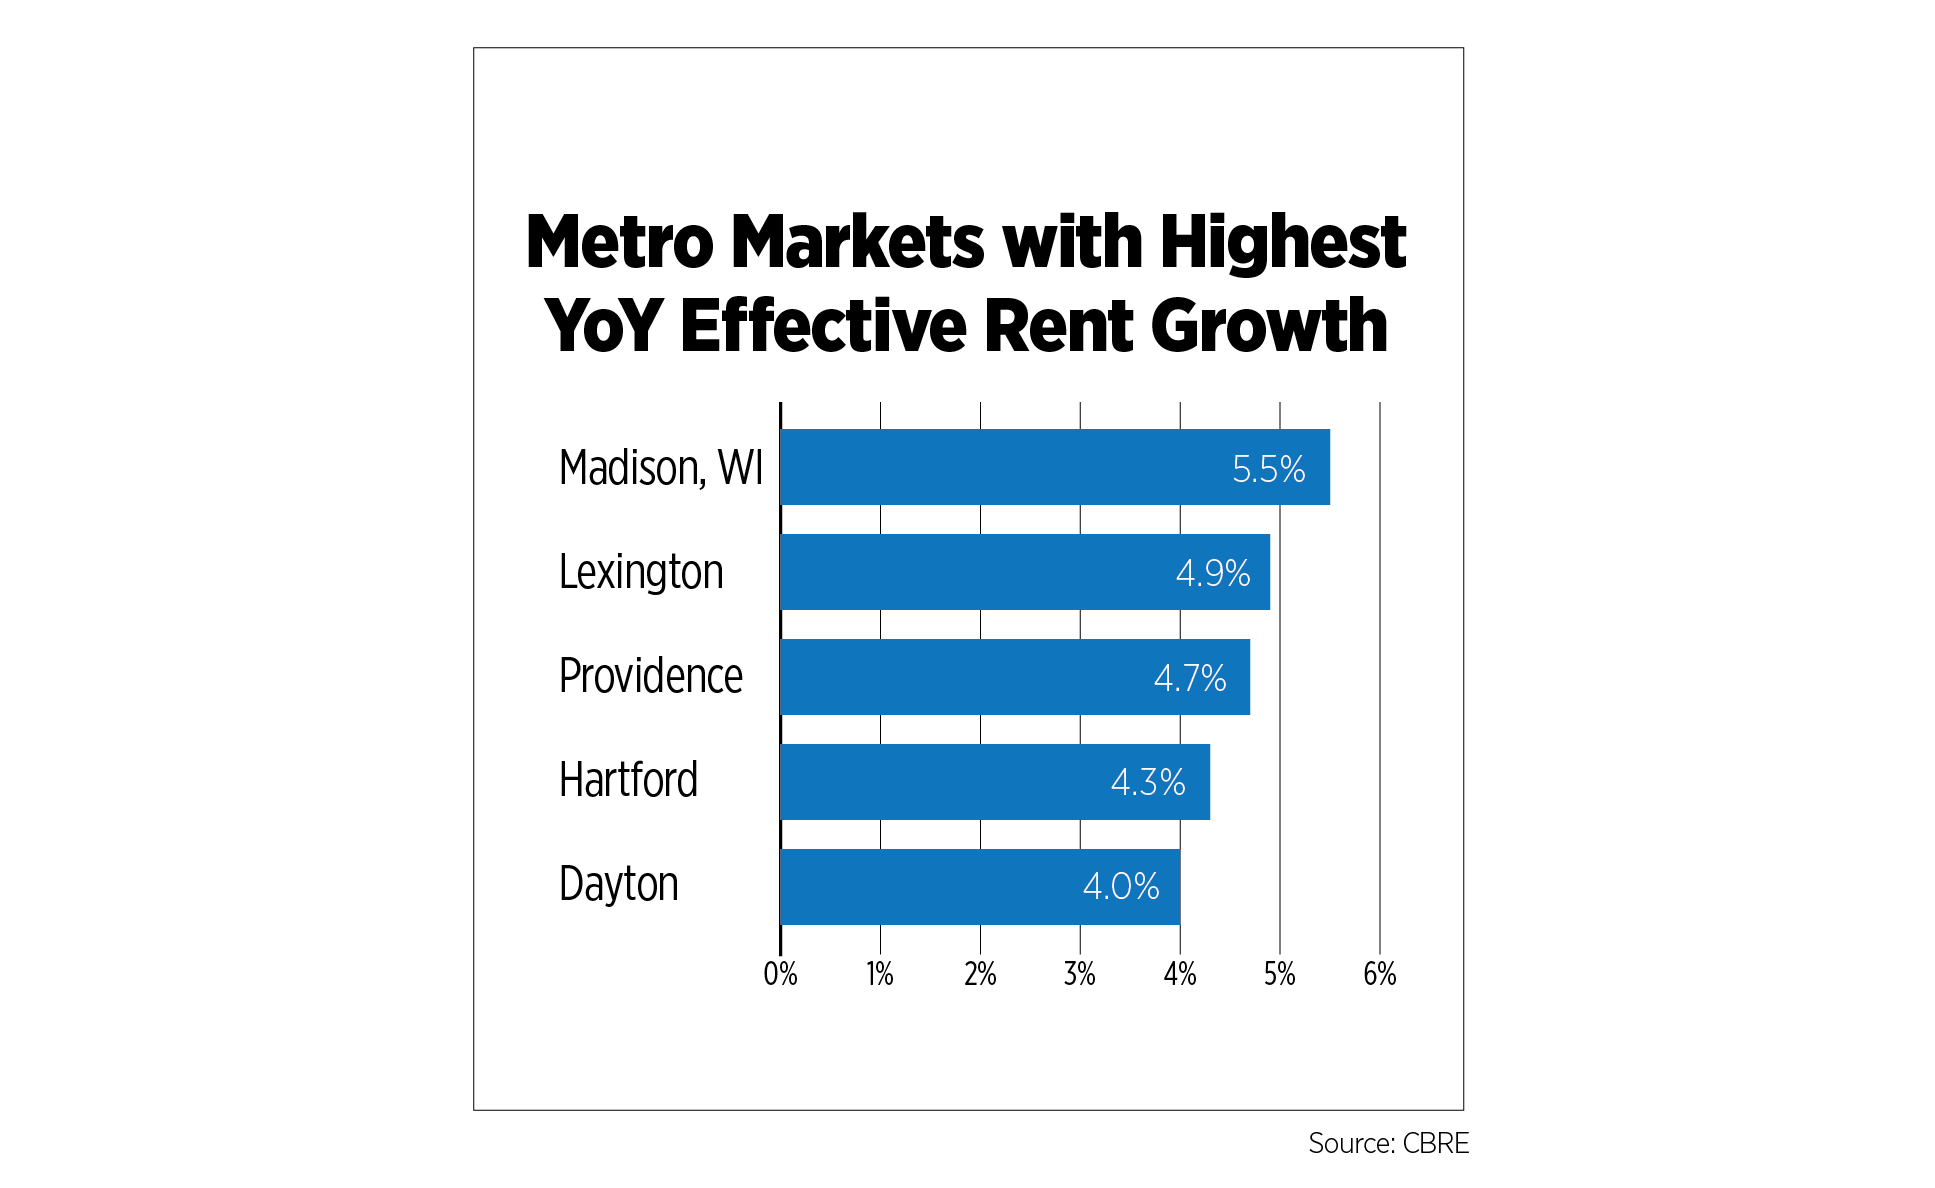 metro markets with highest YOY effective rent growth